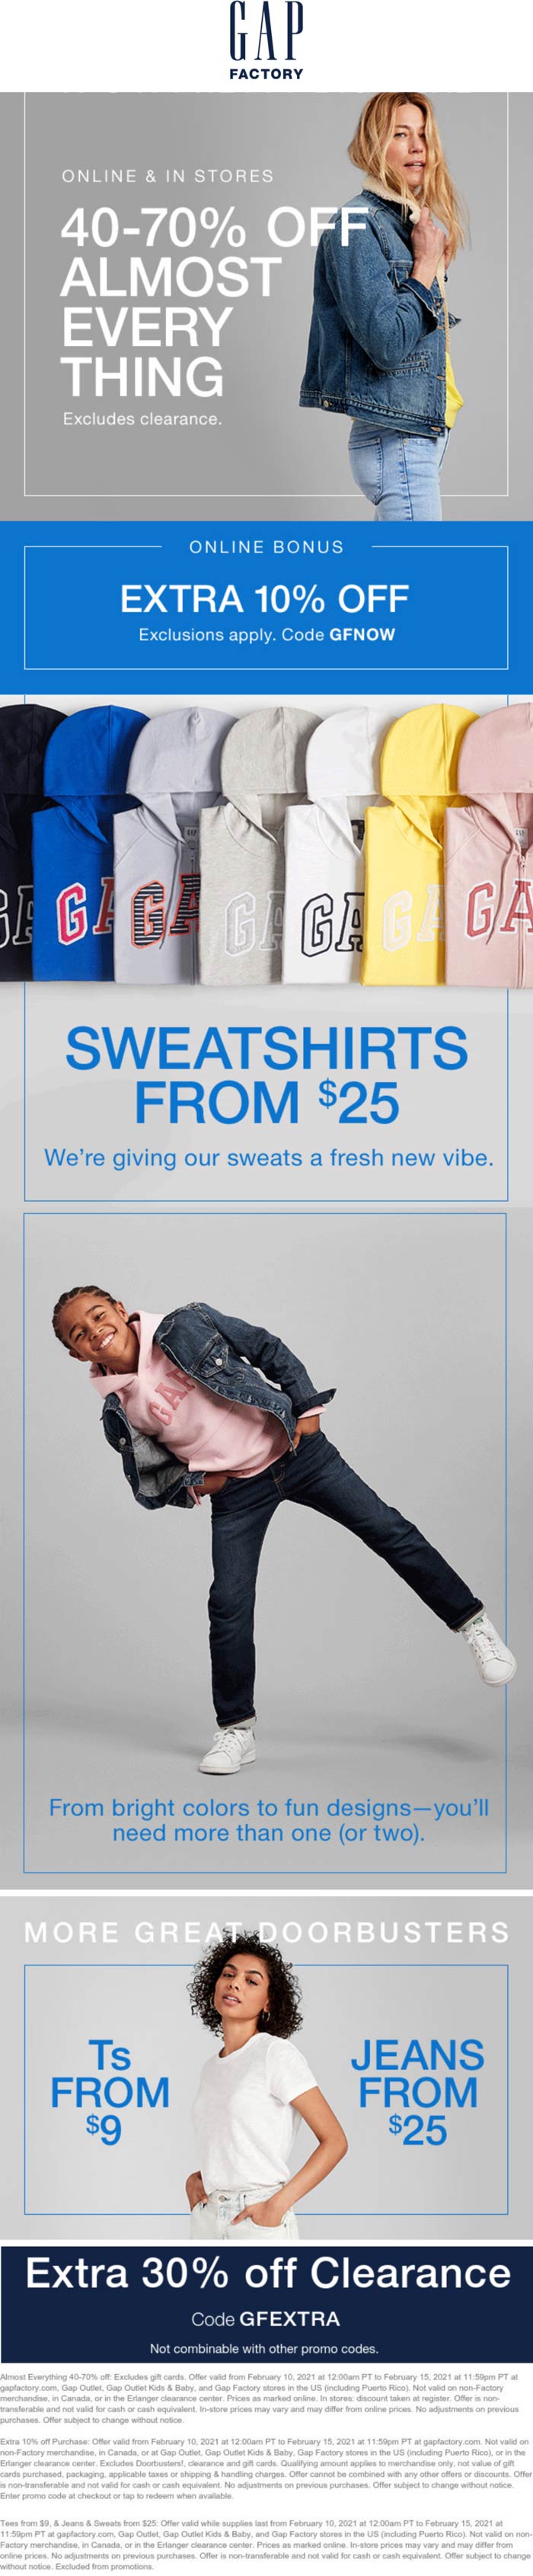 Gap Factory stores Coupon  40-70% off everything today at Gap Factory, additional 10% online via promo code GFNOW #gapfactory 